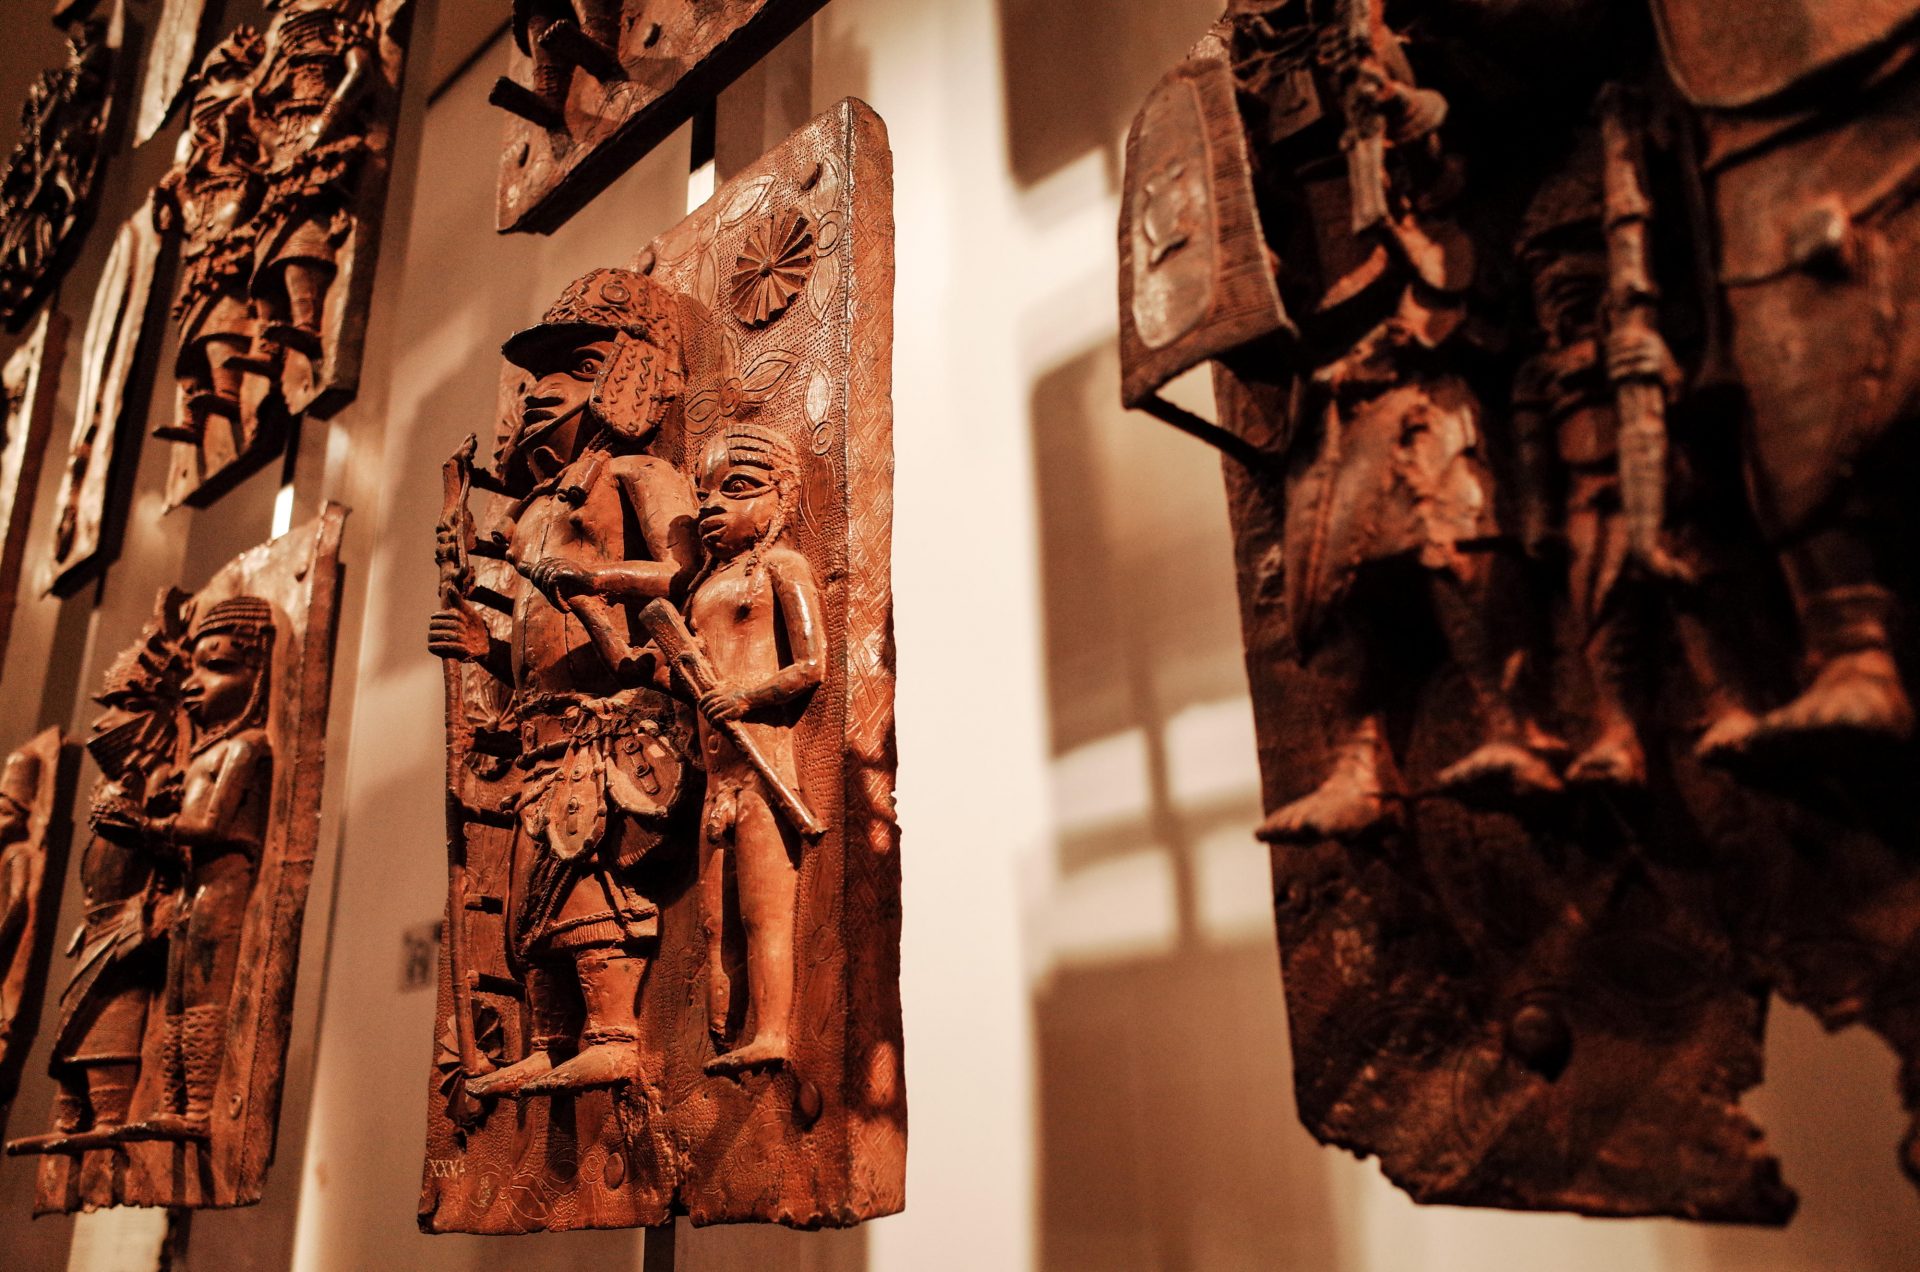 Some of the Benin Bronzes on show at the British Museum. Photo: David Cliff/SOPA Images/LightRocket/Getty Images.